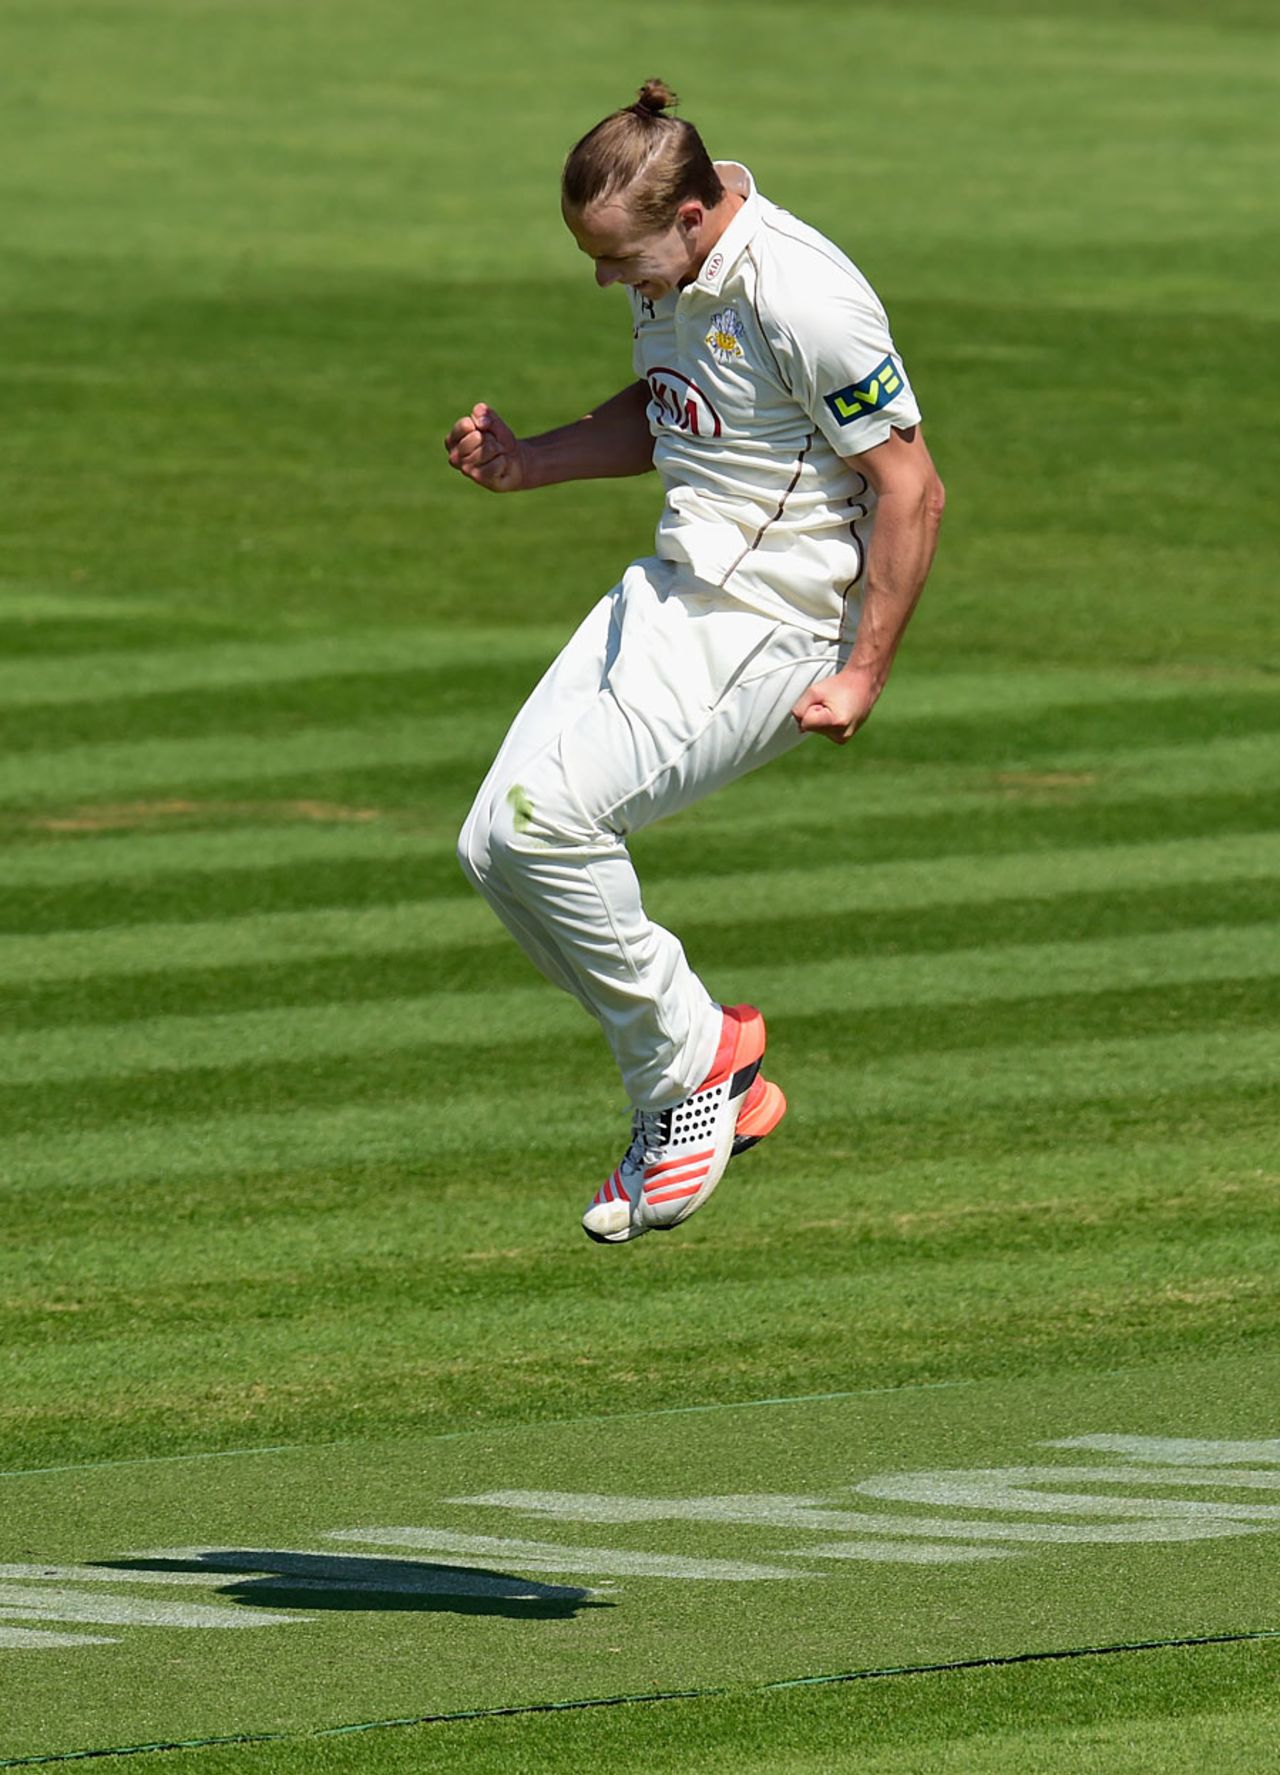 Tom Curran enjoyed removed Colin Ingram, Glamorgan v Surrey, County Championship, Division Two, 3rd day, Cardiff, April 21, 2015